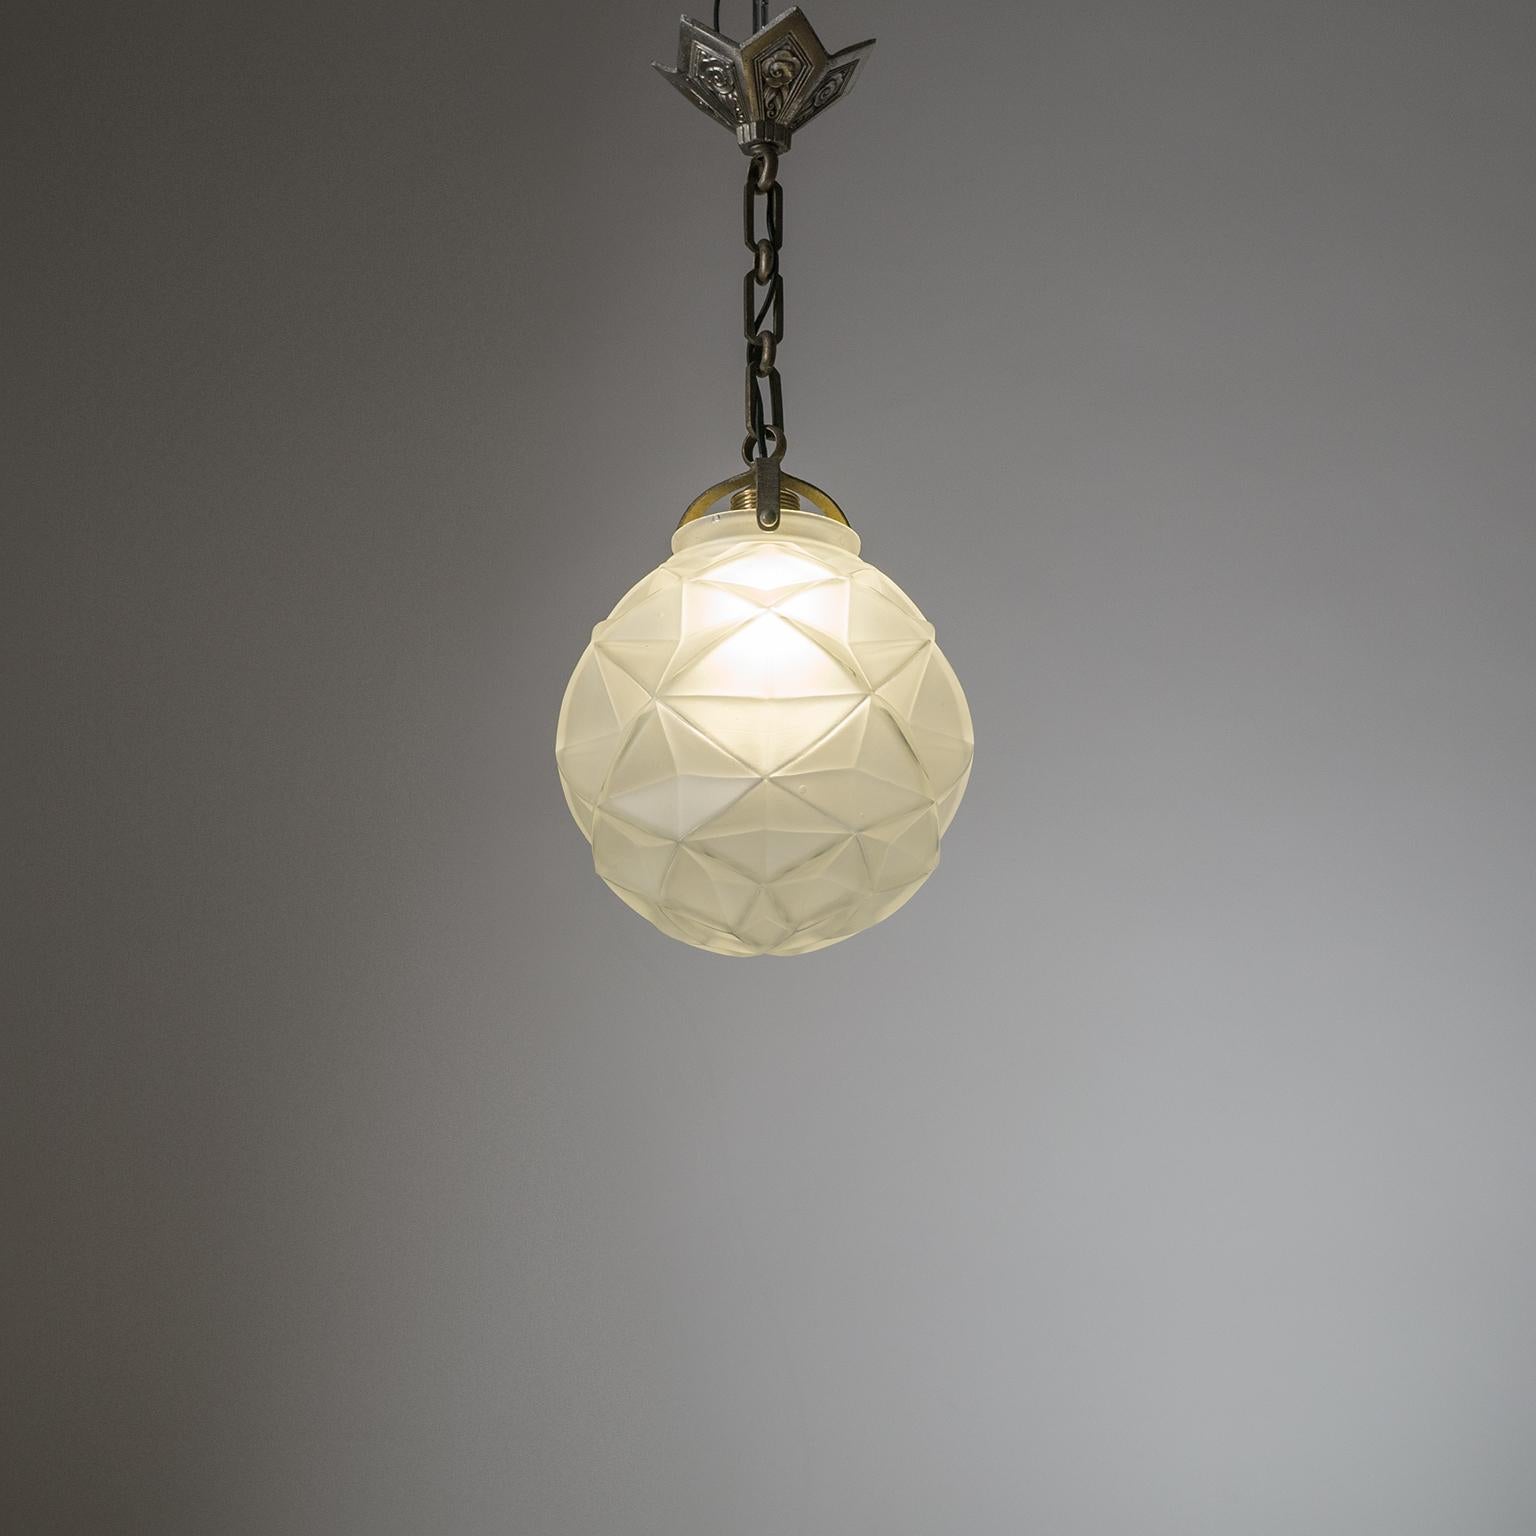 French Art Deco Pendant, 1930s, Satin Glass and Nickel 7